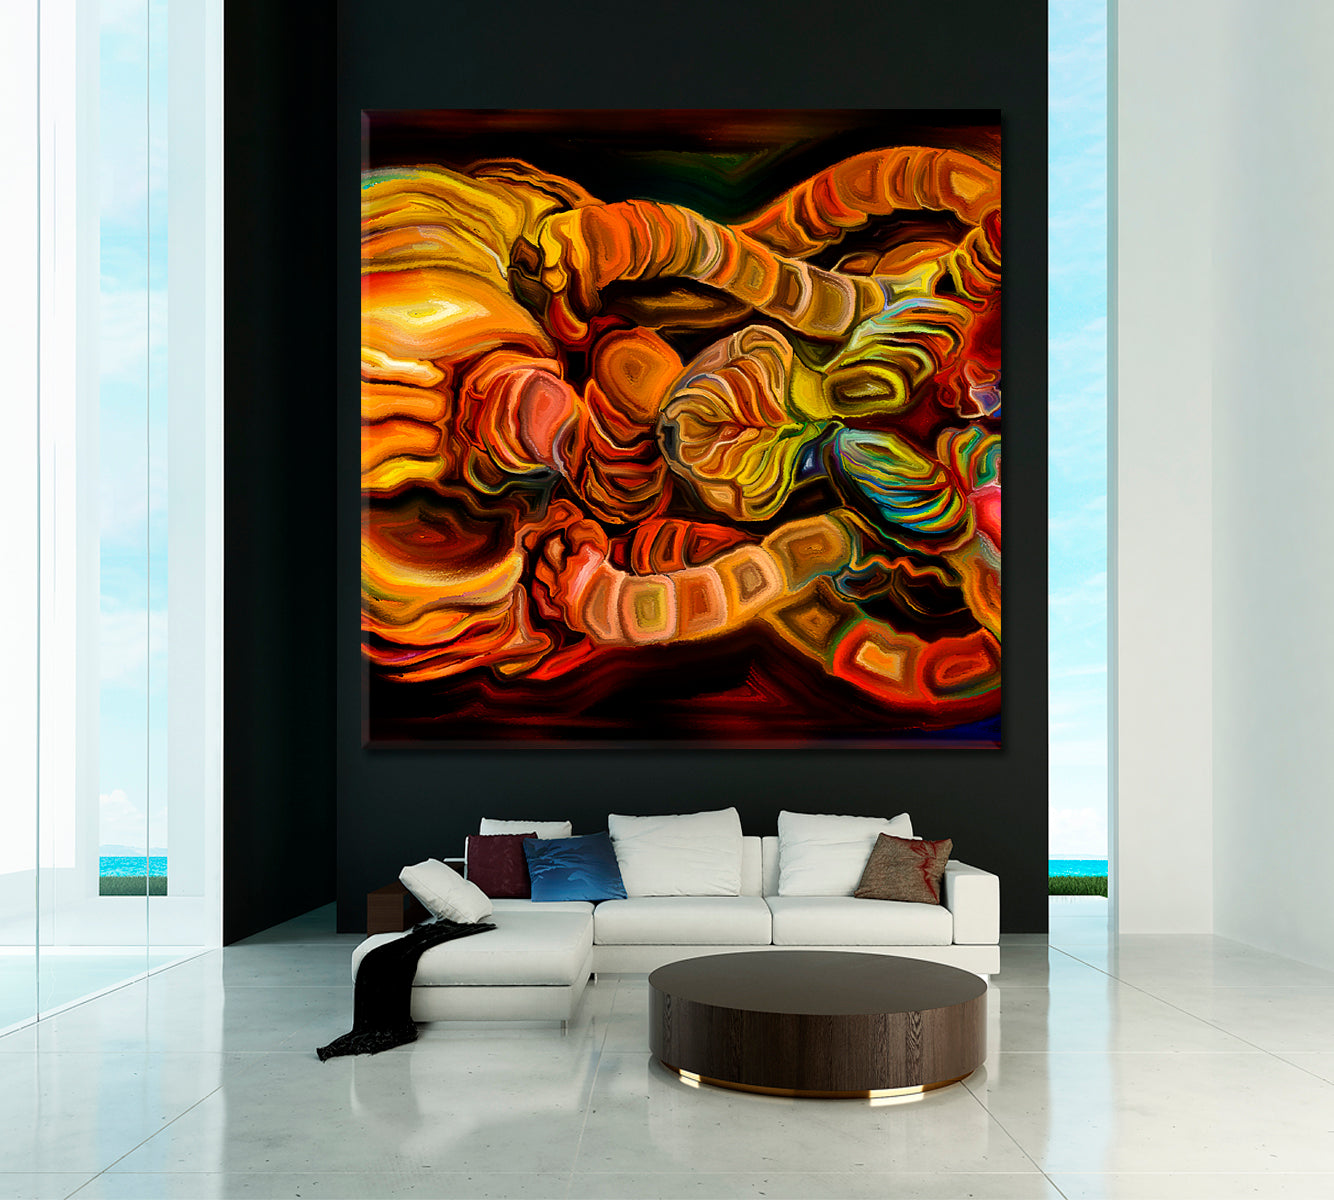 LIFE INSIDE Abstract Forms - Square Panel Abstract Art Print Artesty 1 Panel 12"x12" 